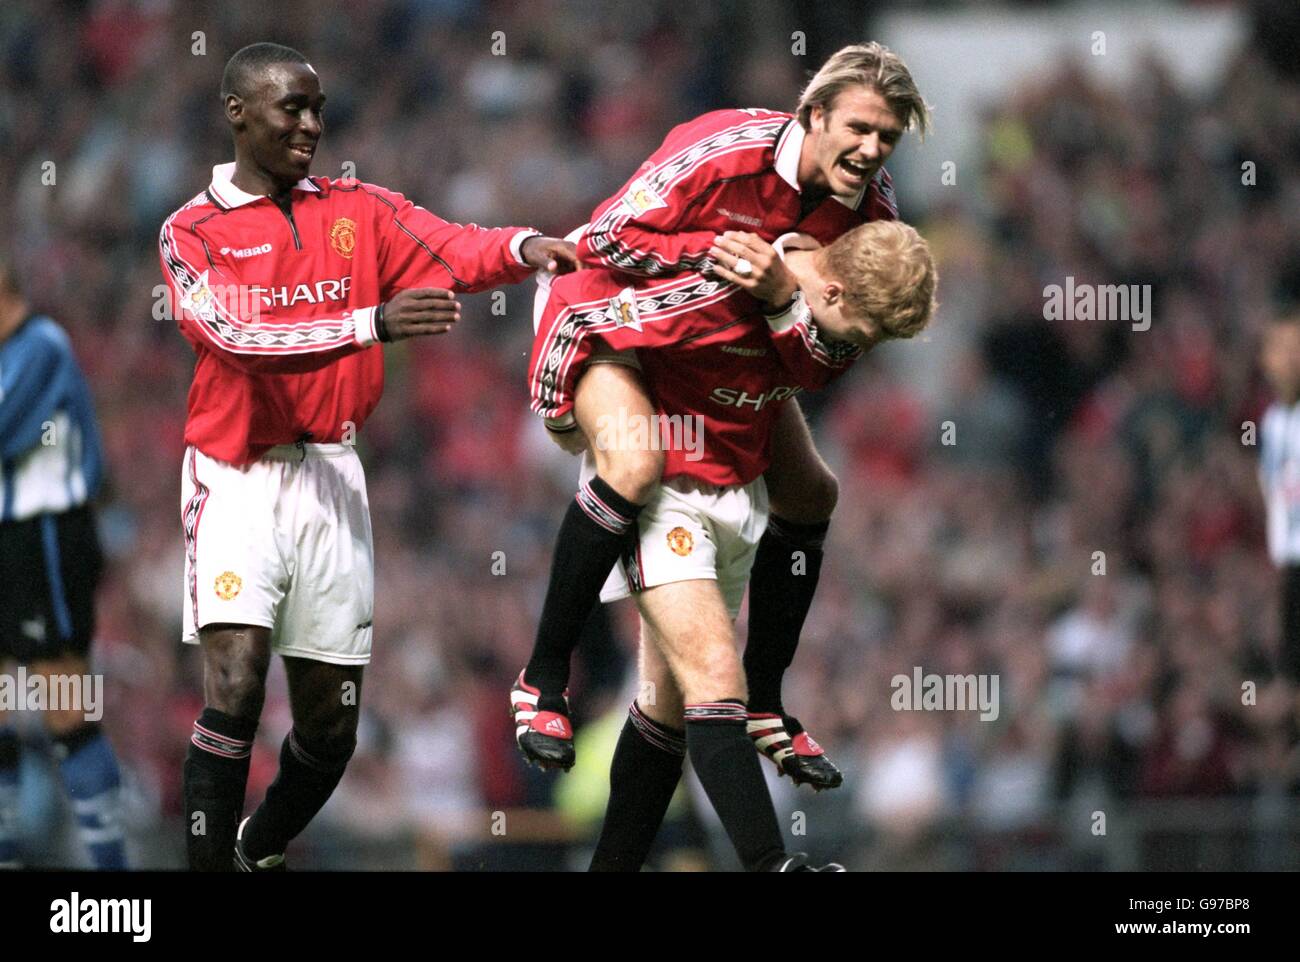 Manchester United's Paul Scholes gives David Beckham a lift after scoring United's first goal against Sheffield Wednesday as Andy Cole looks on Stock Photo